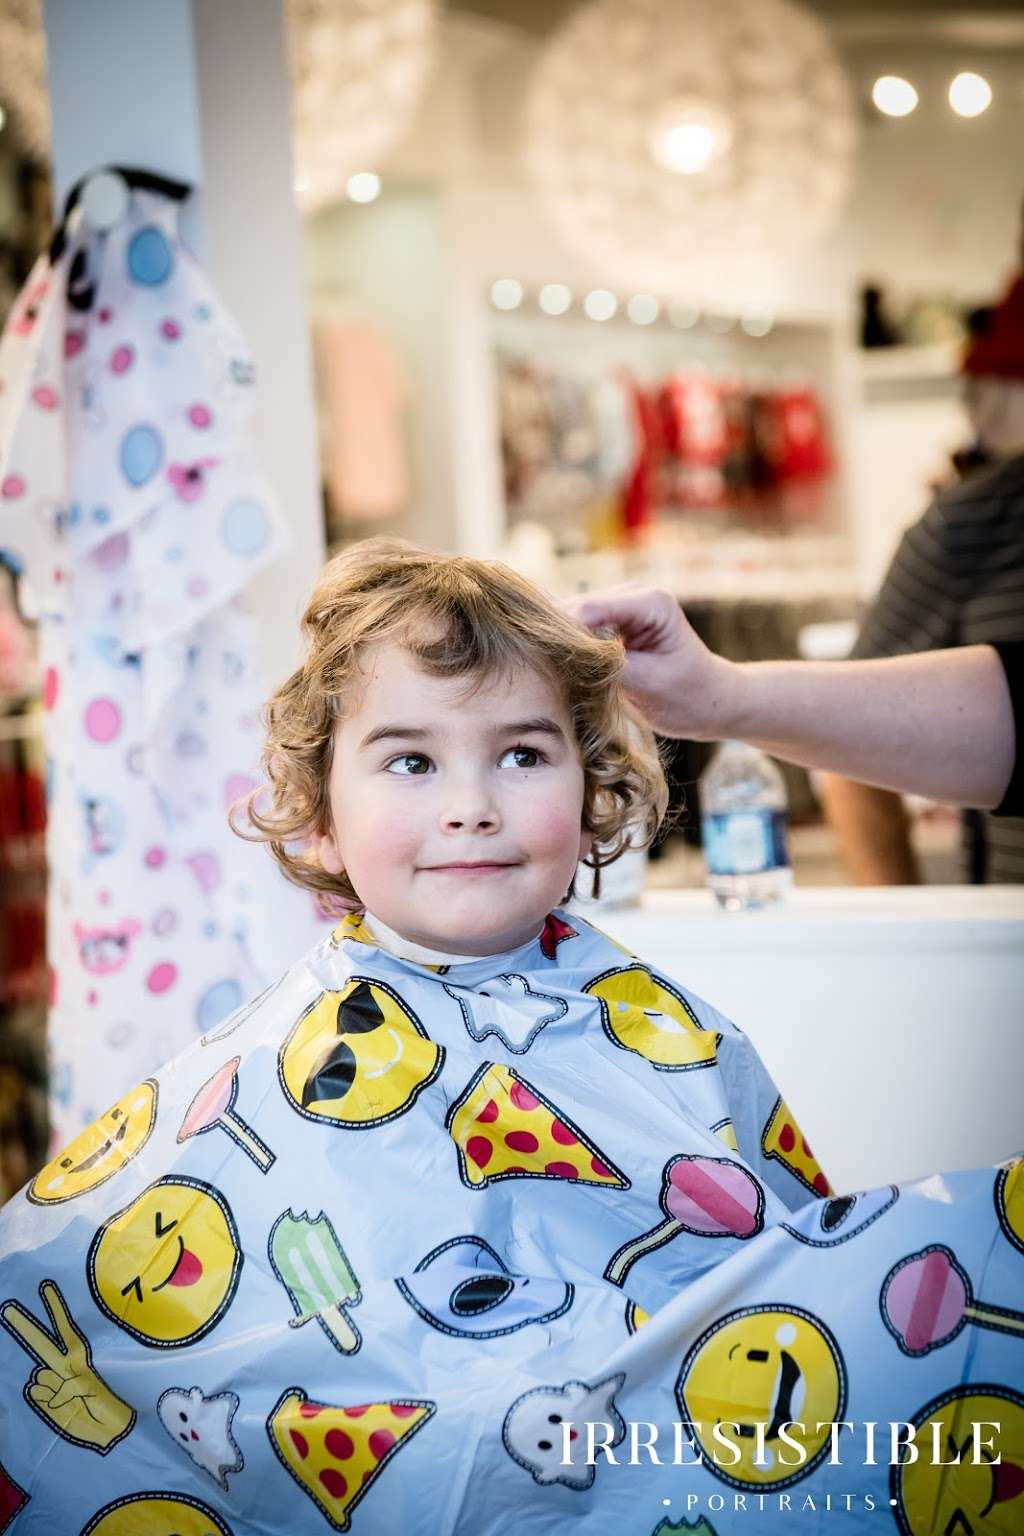 Sky’s cuts for kids + toys | 279 Williamson Rd Room 1, Mooresville, NC 28117, USA | Phone: (704) 660-5735